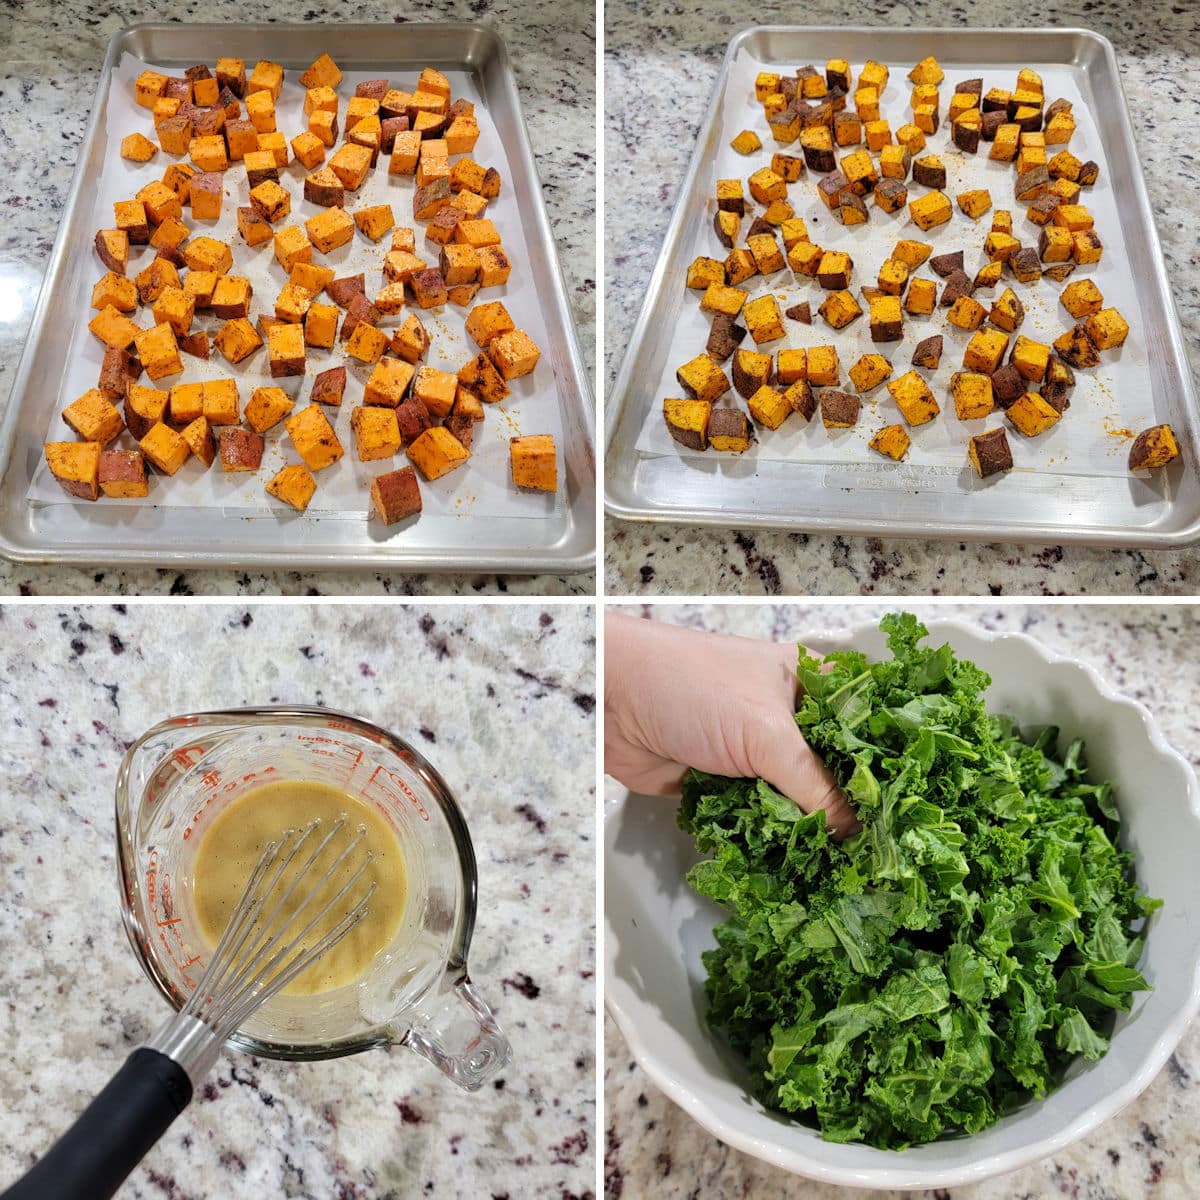 Making roasted sweet potatoes and dressing for salad.